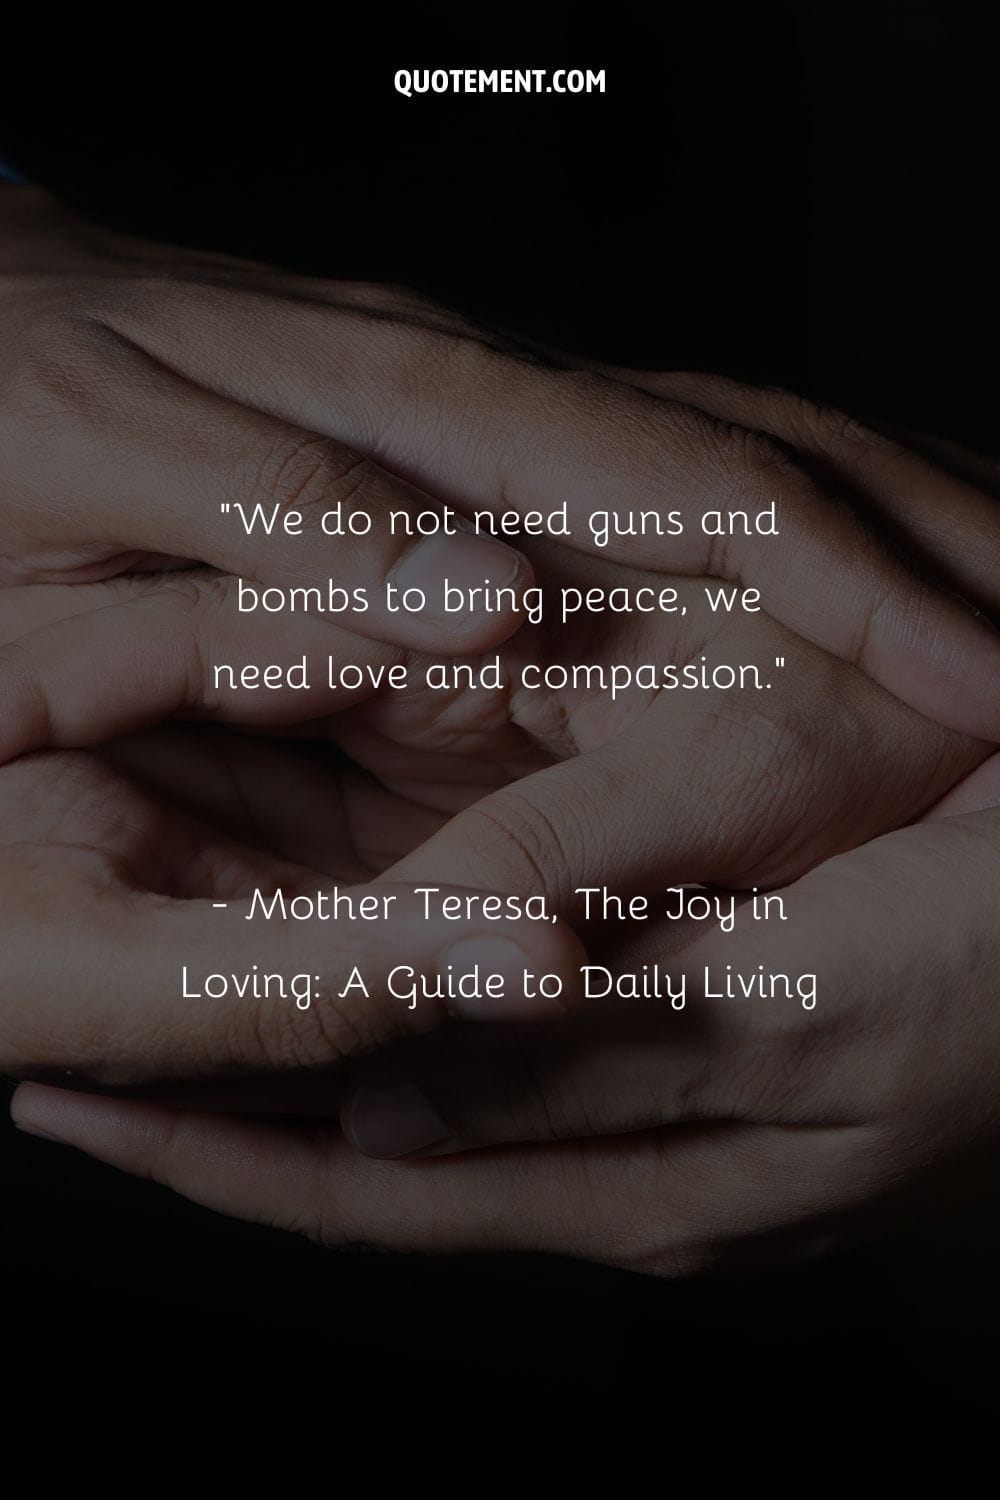 We do not need guns and bombs to bring peace, we need love and compassion.